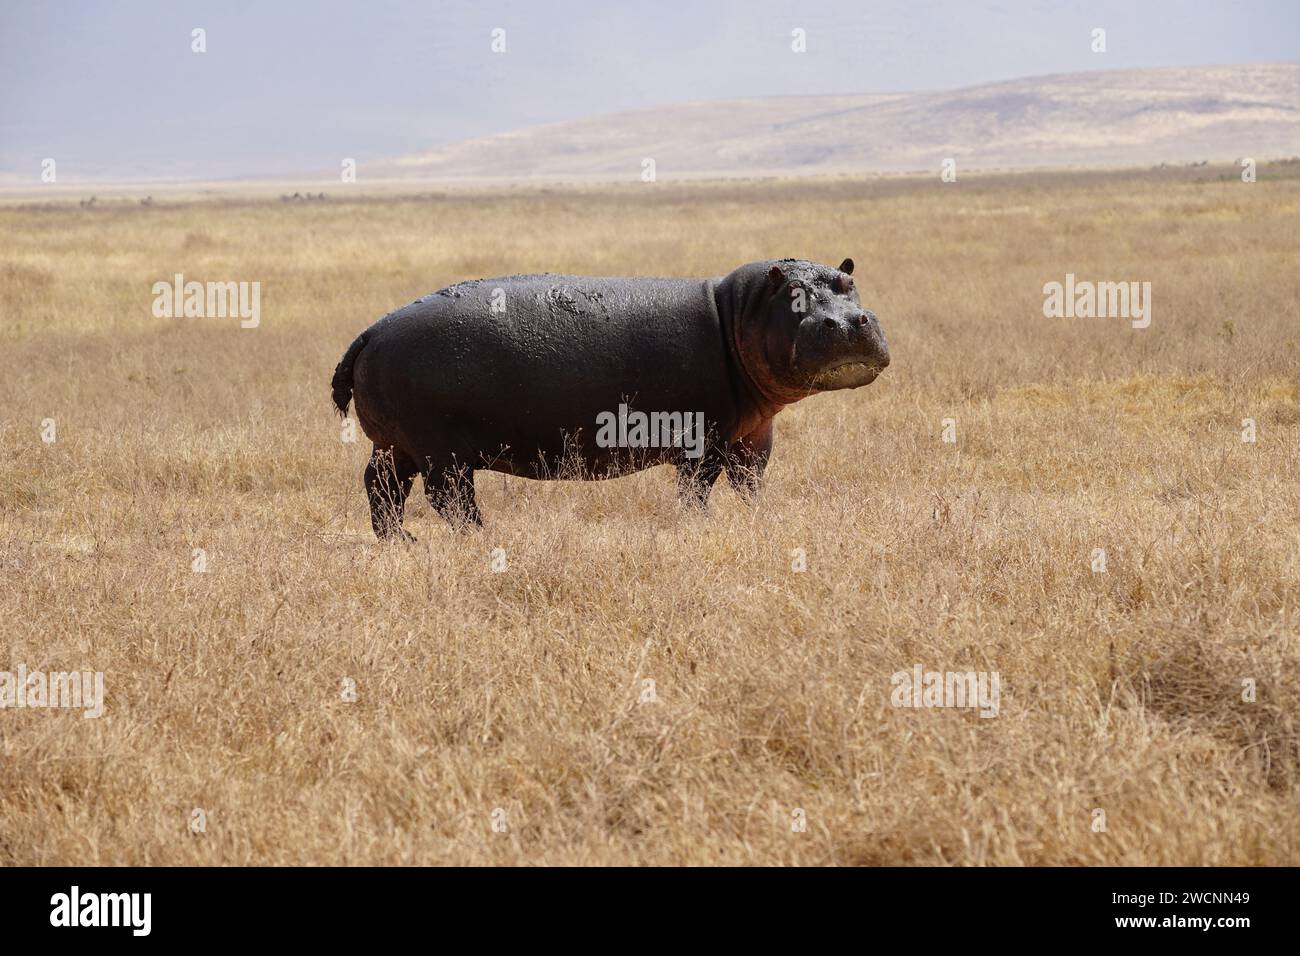 hippo on grass, full body, side, face, looking Stock Photo